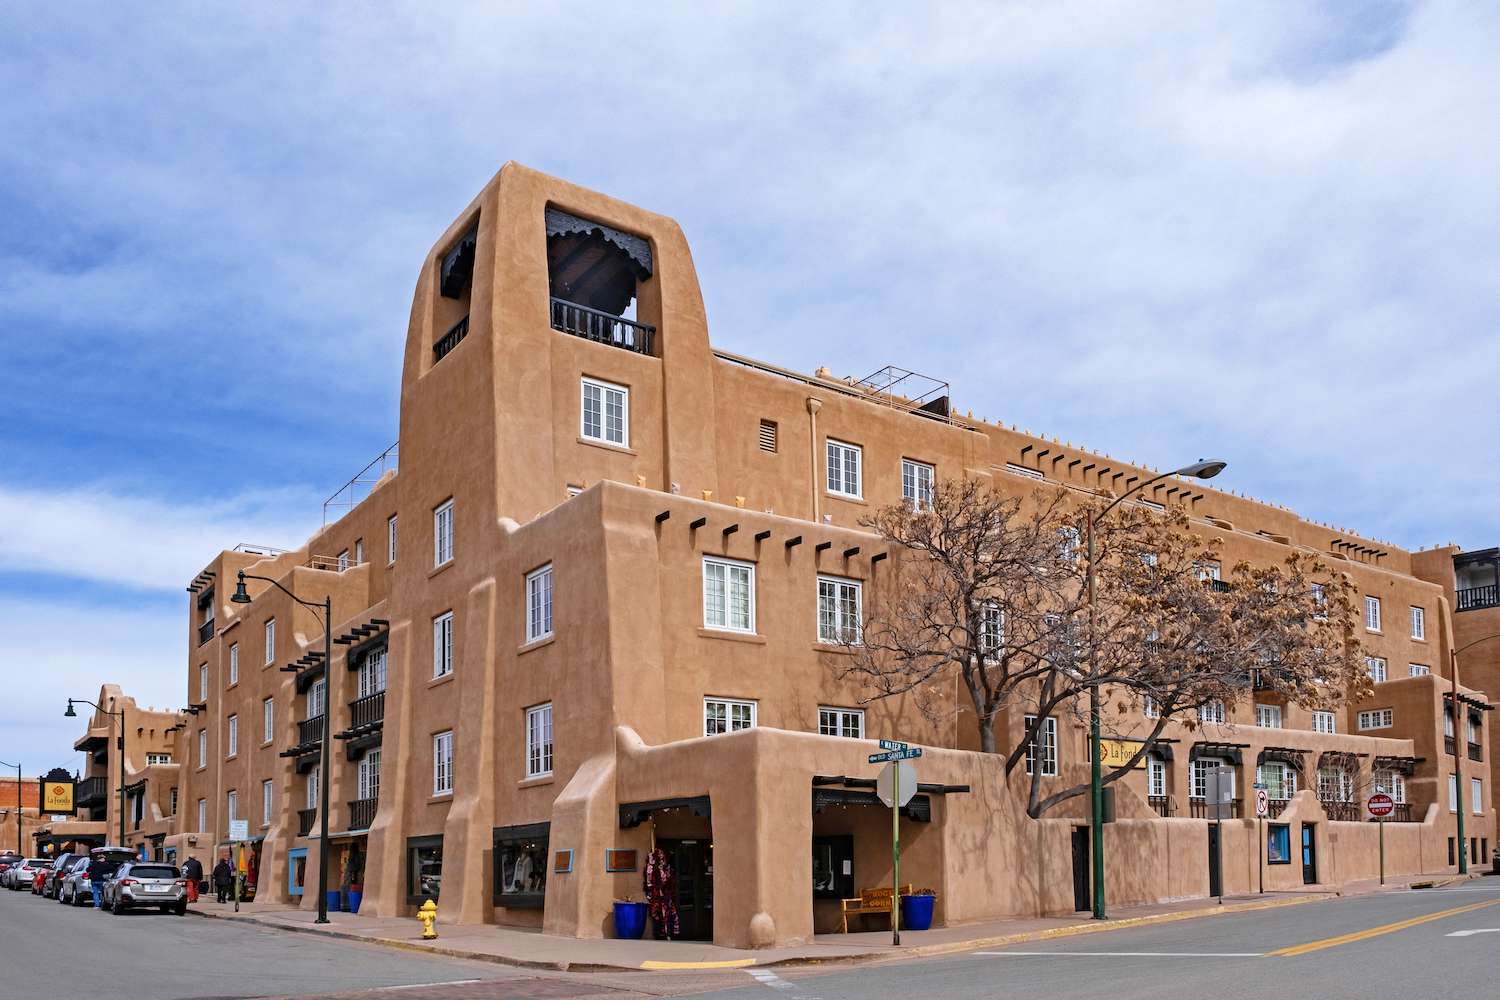 La Fonda on the Plaza, luxurious hotel in adobe Pueblo Revival style in downtown Santa Fe, capital city of New Mexico, United States.